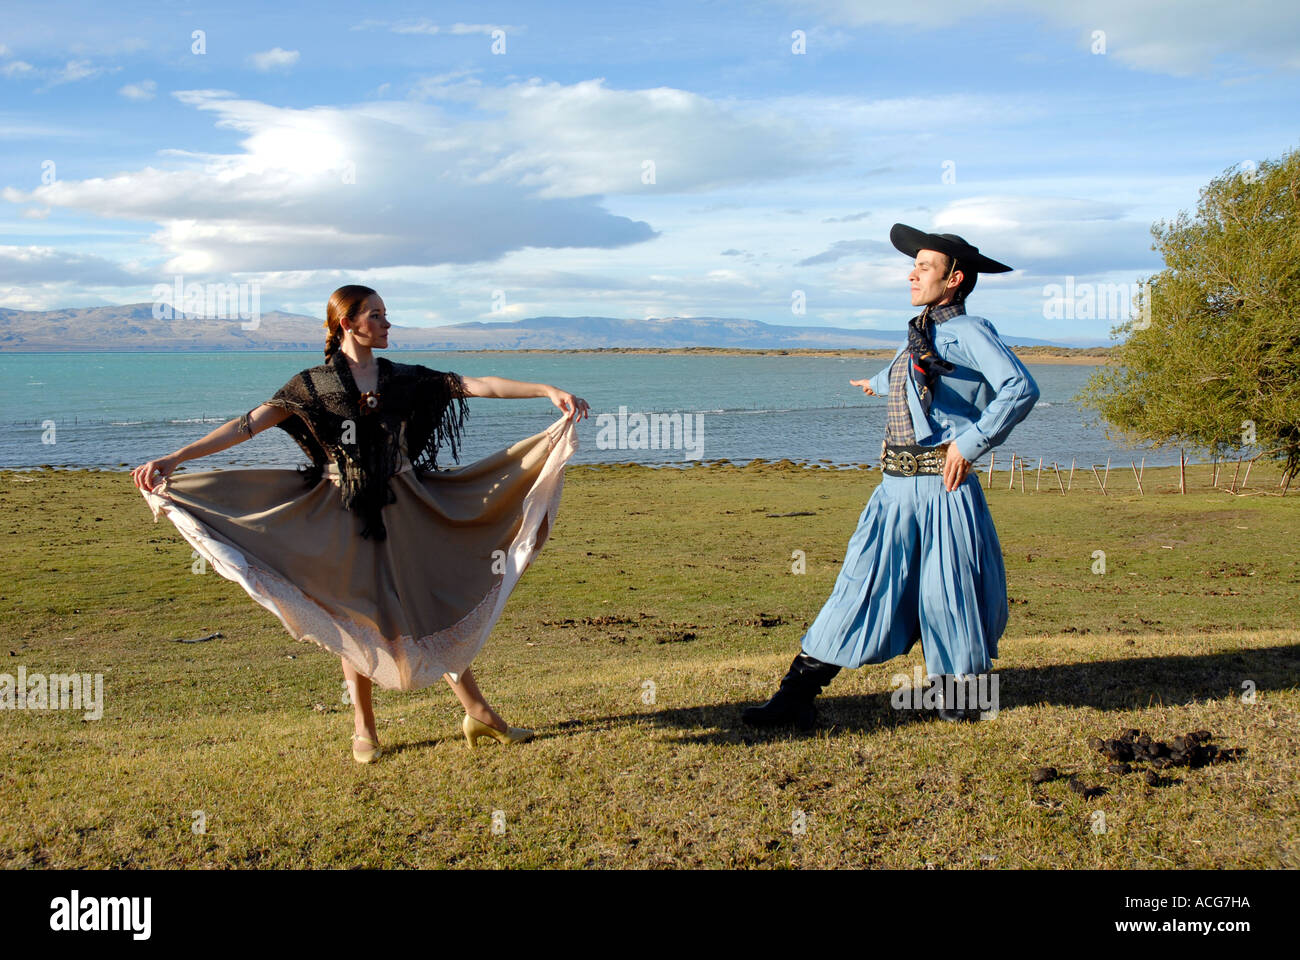 Dancers in Patagonian traditional costumes on an estancia El Calafate  Patagonia Argentina Stock Photo - Alamy